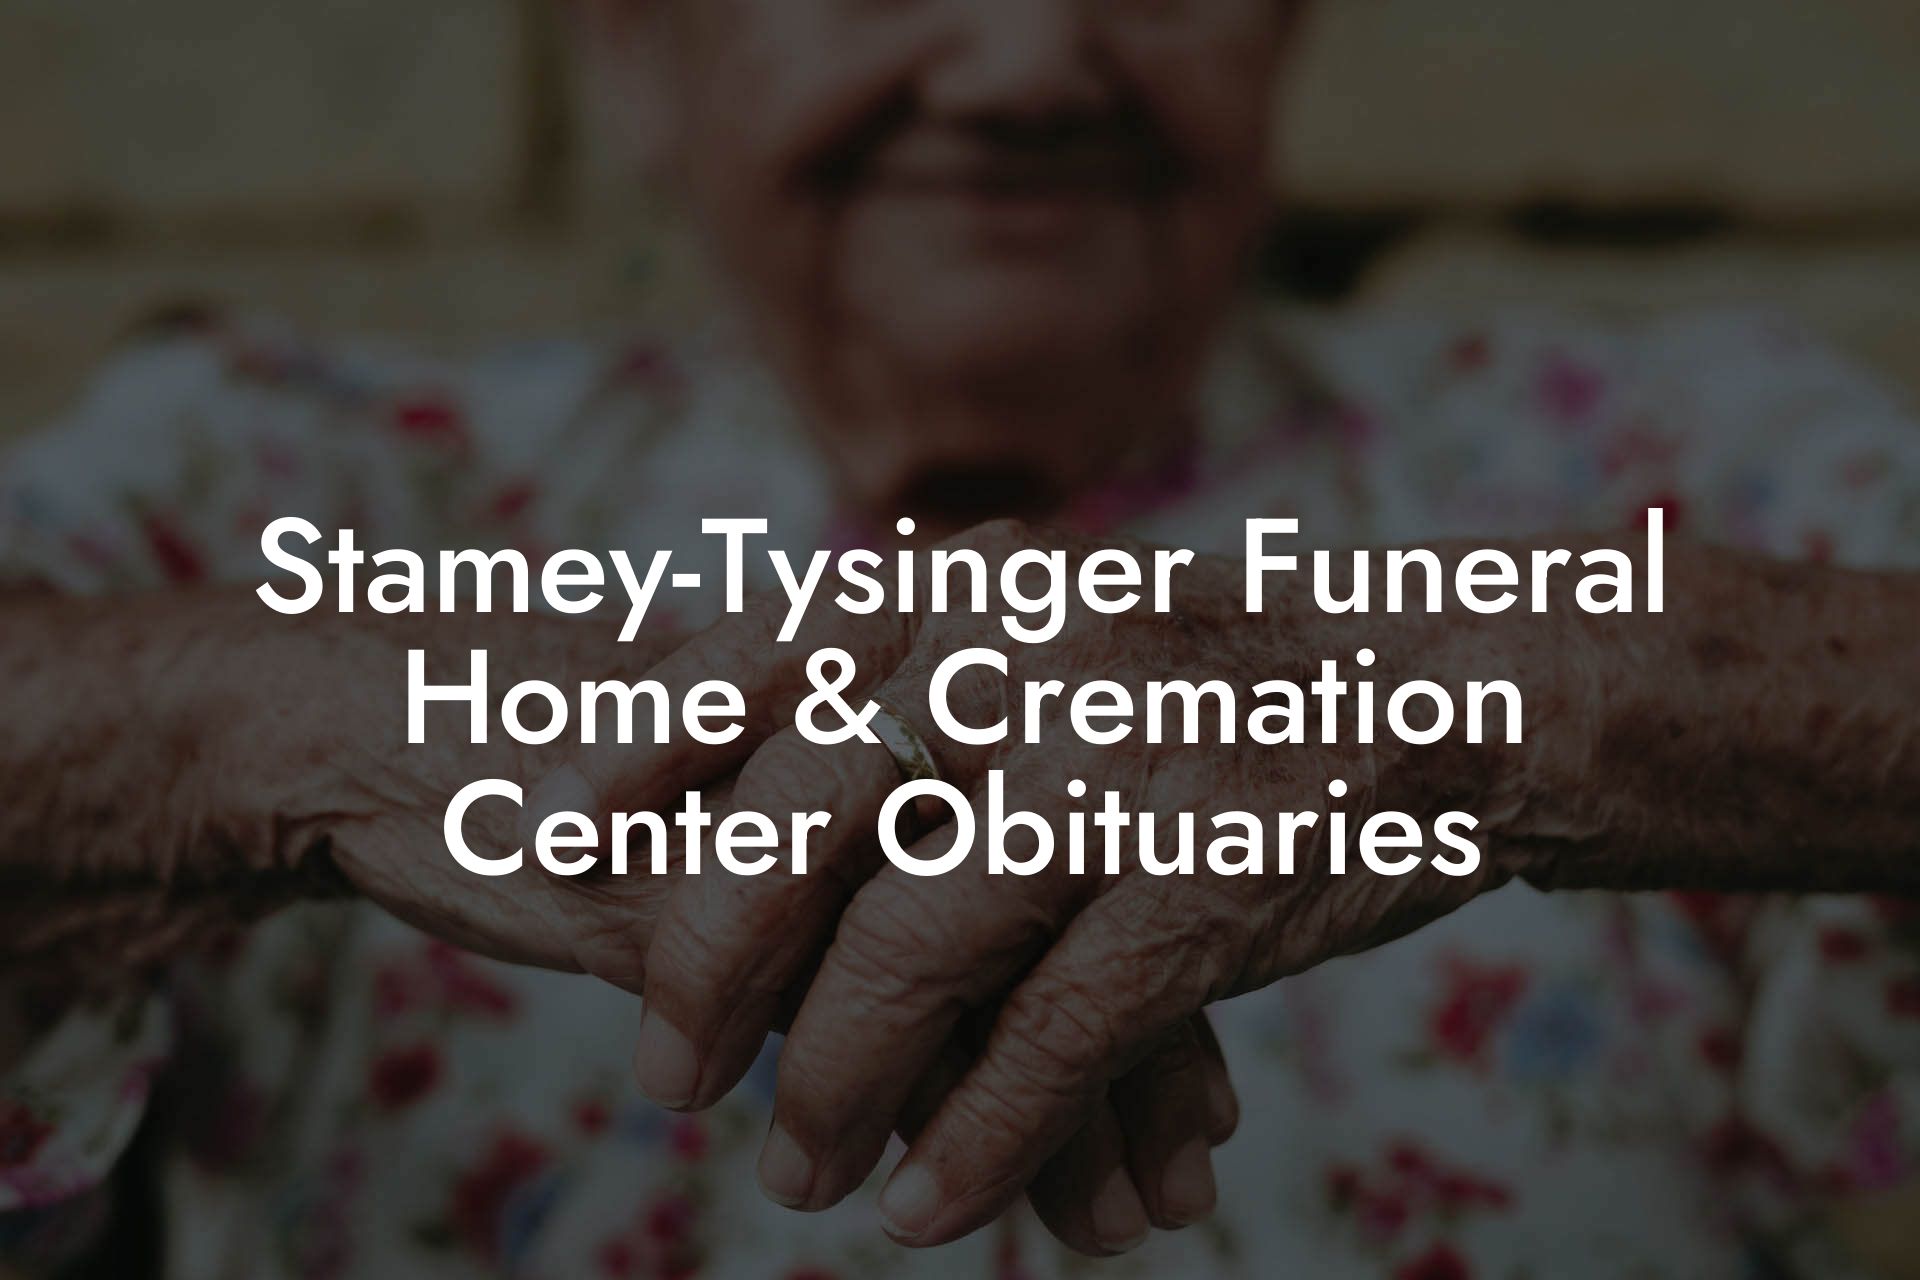 Stamey-Tysinger Funeral Home & Cremation Center Obituaries